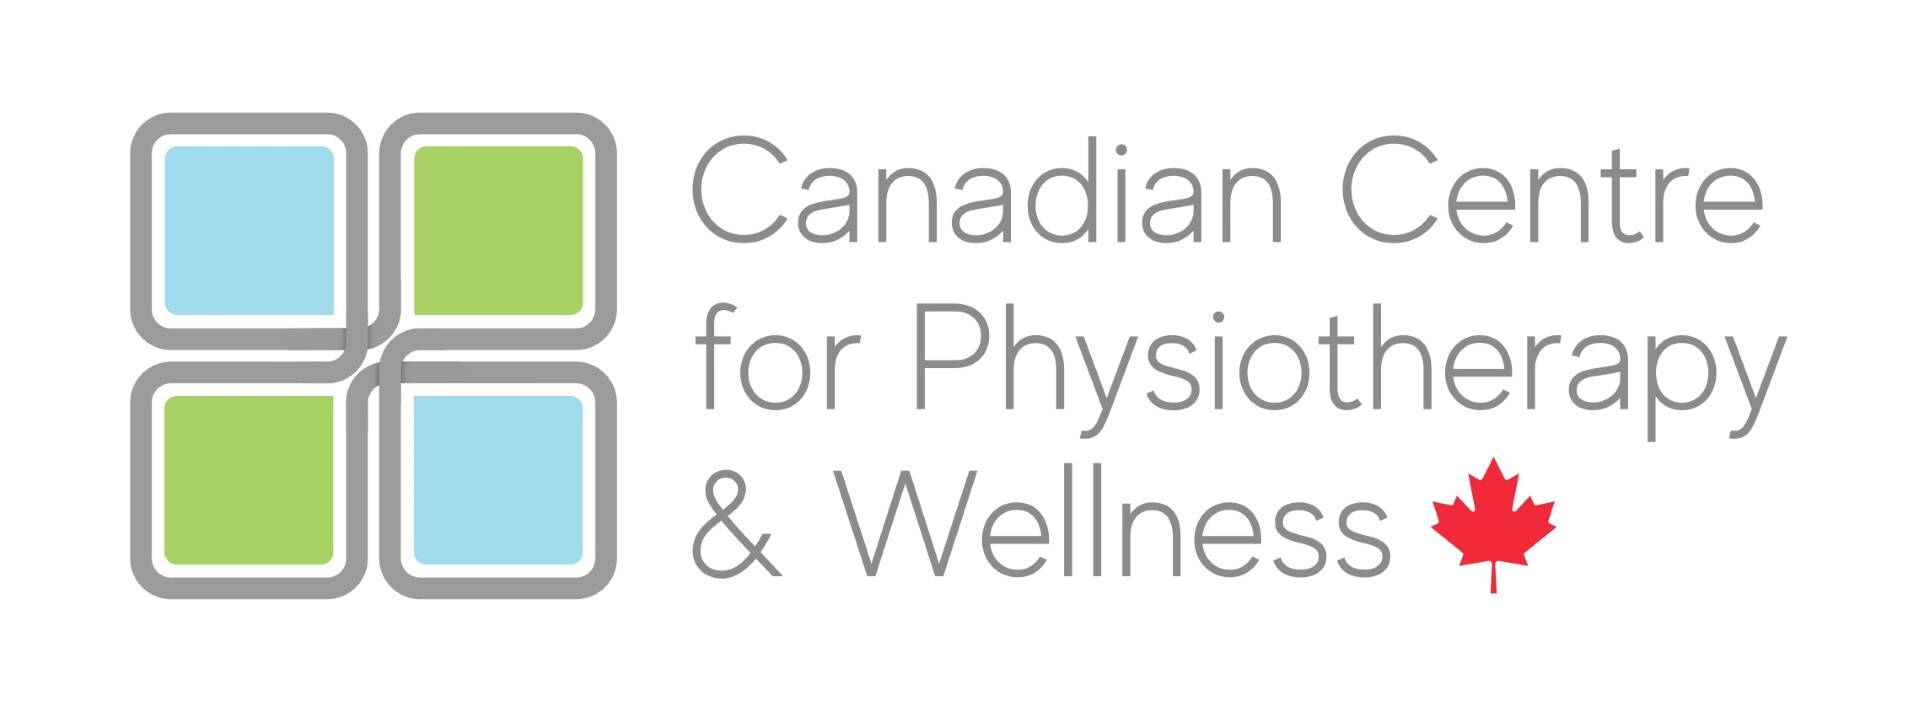 Canadian Centre for Physiotherapy & Wellness 